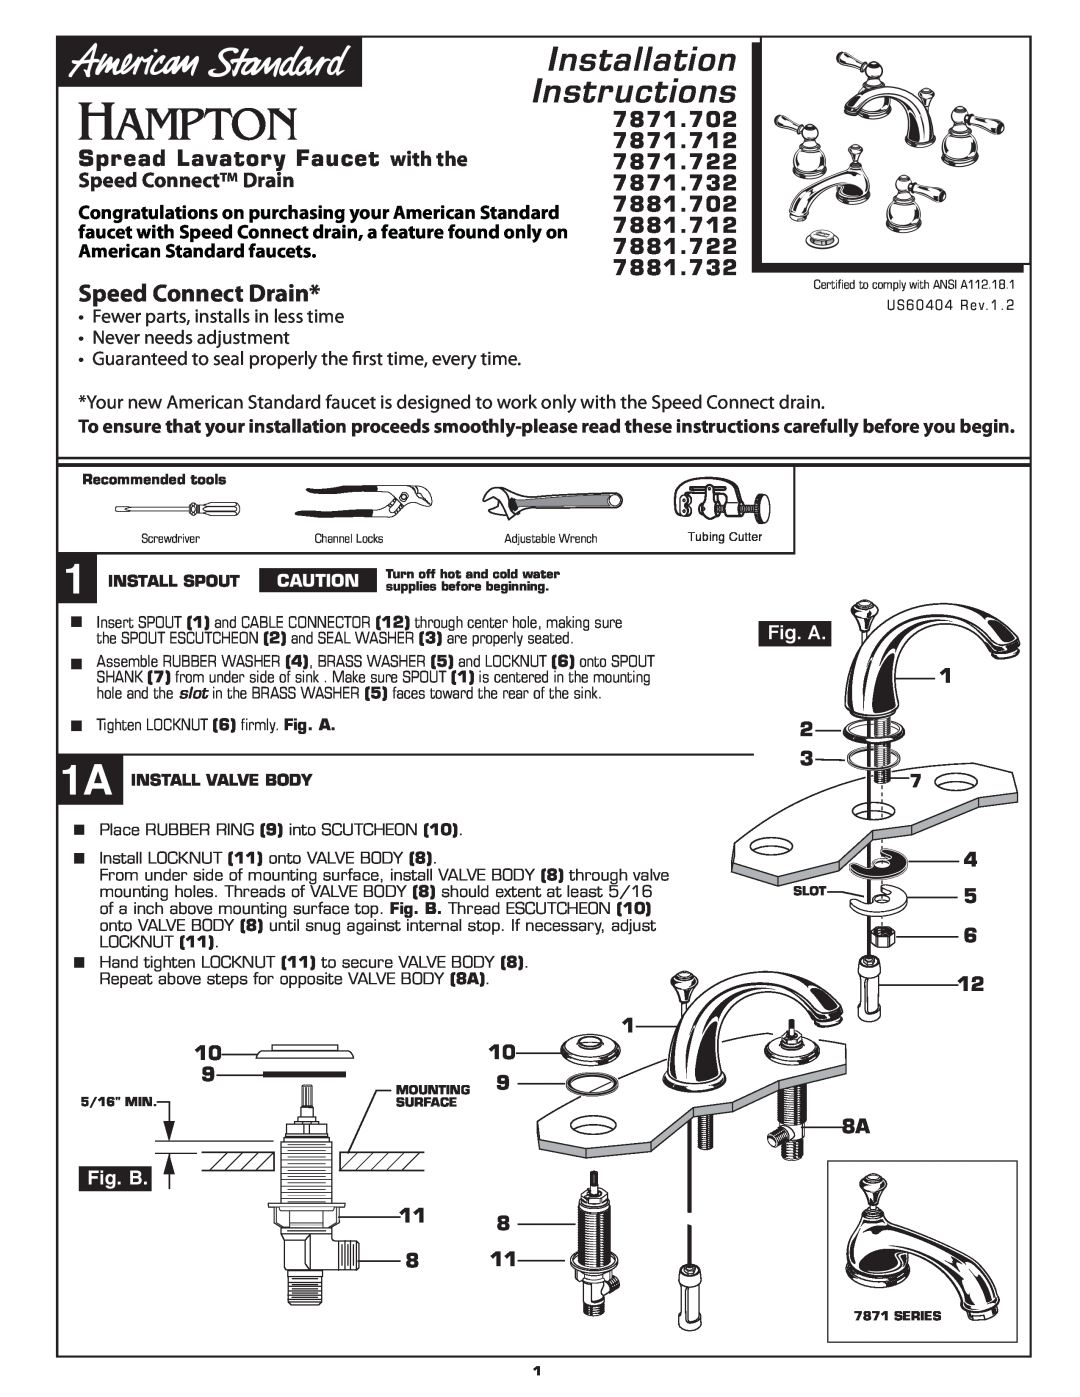 American Standard 7881.732 installation instructions Speed Connect Drain, Spread Lavatory Faucet with the, 7871.702 